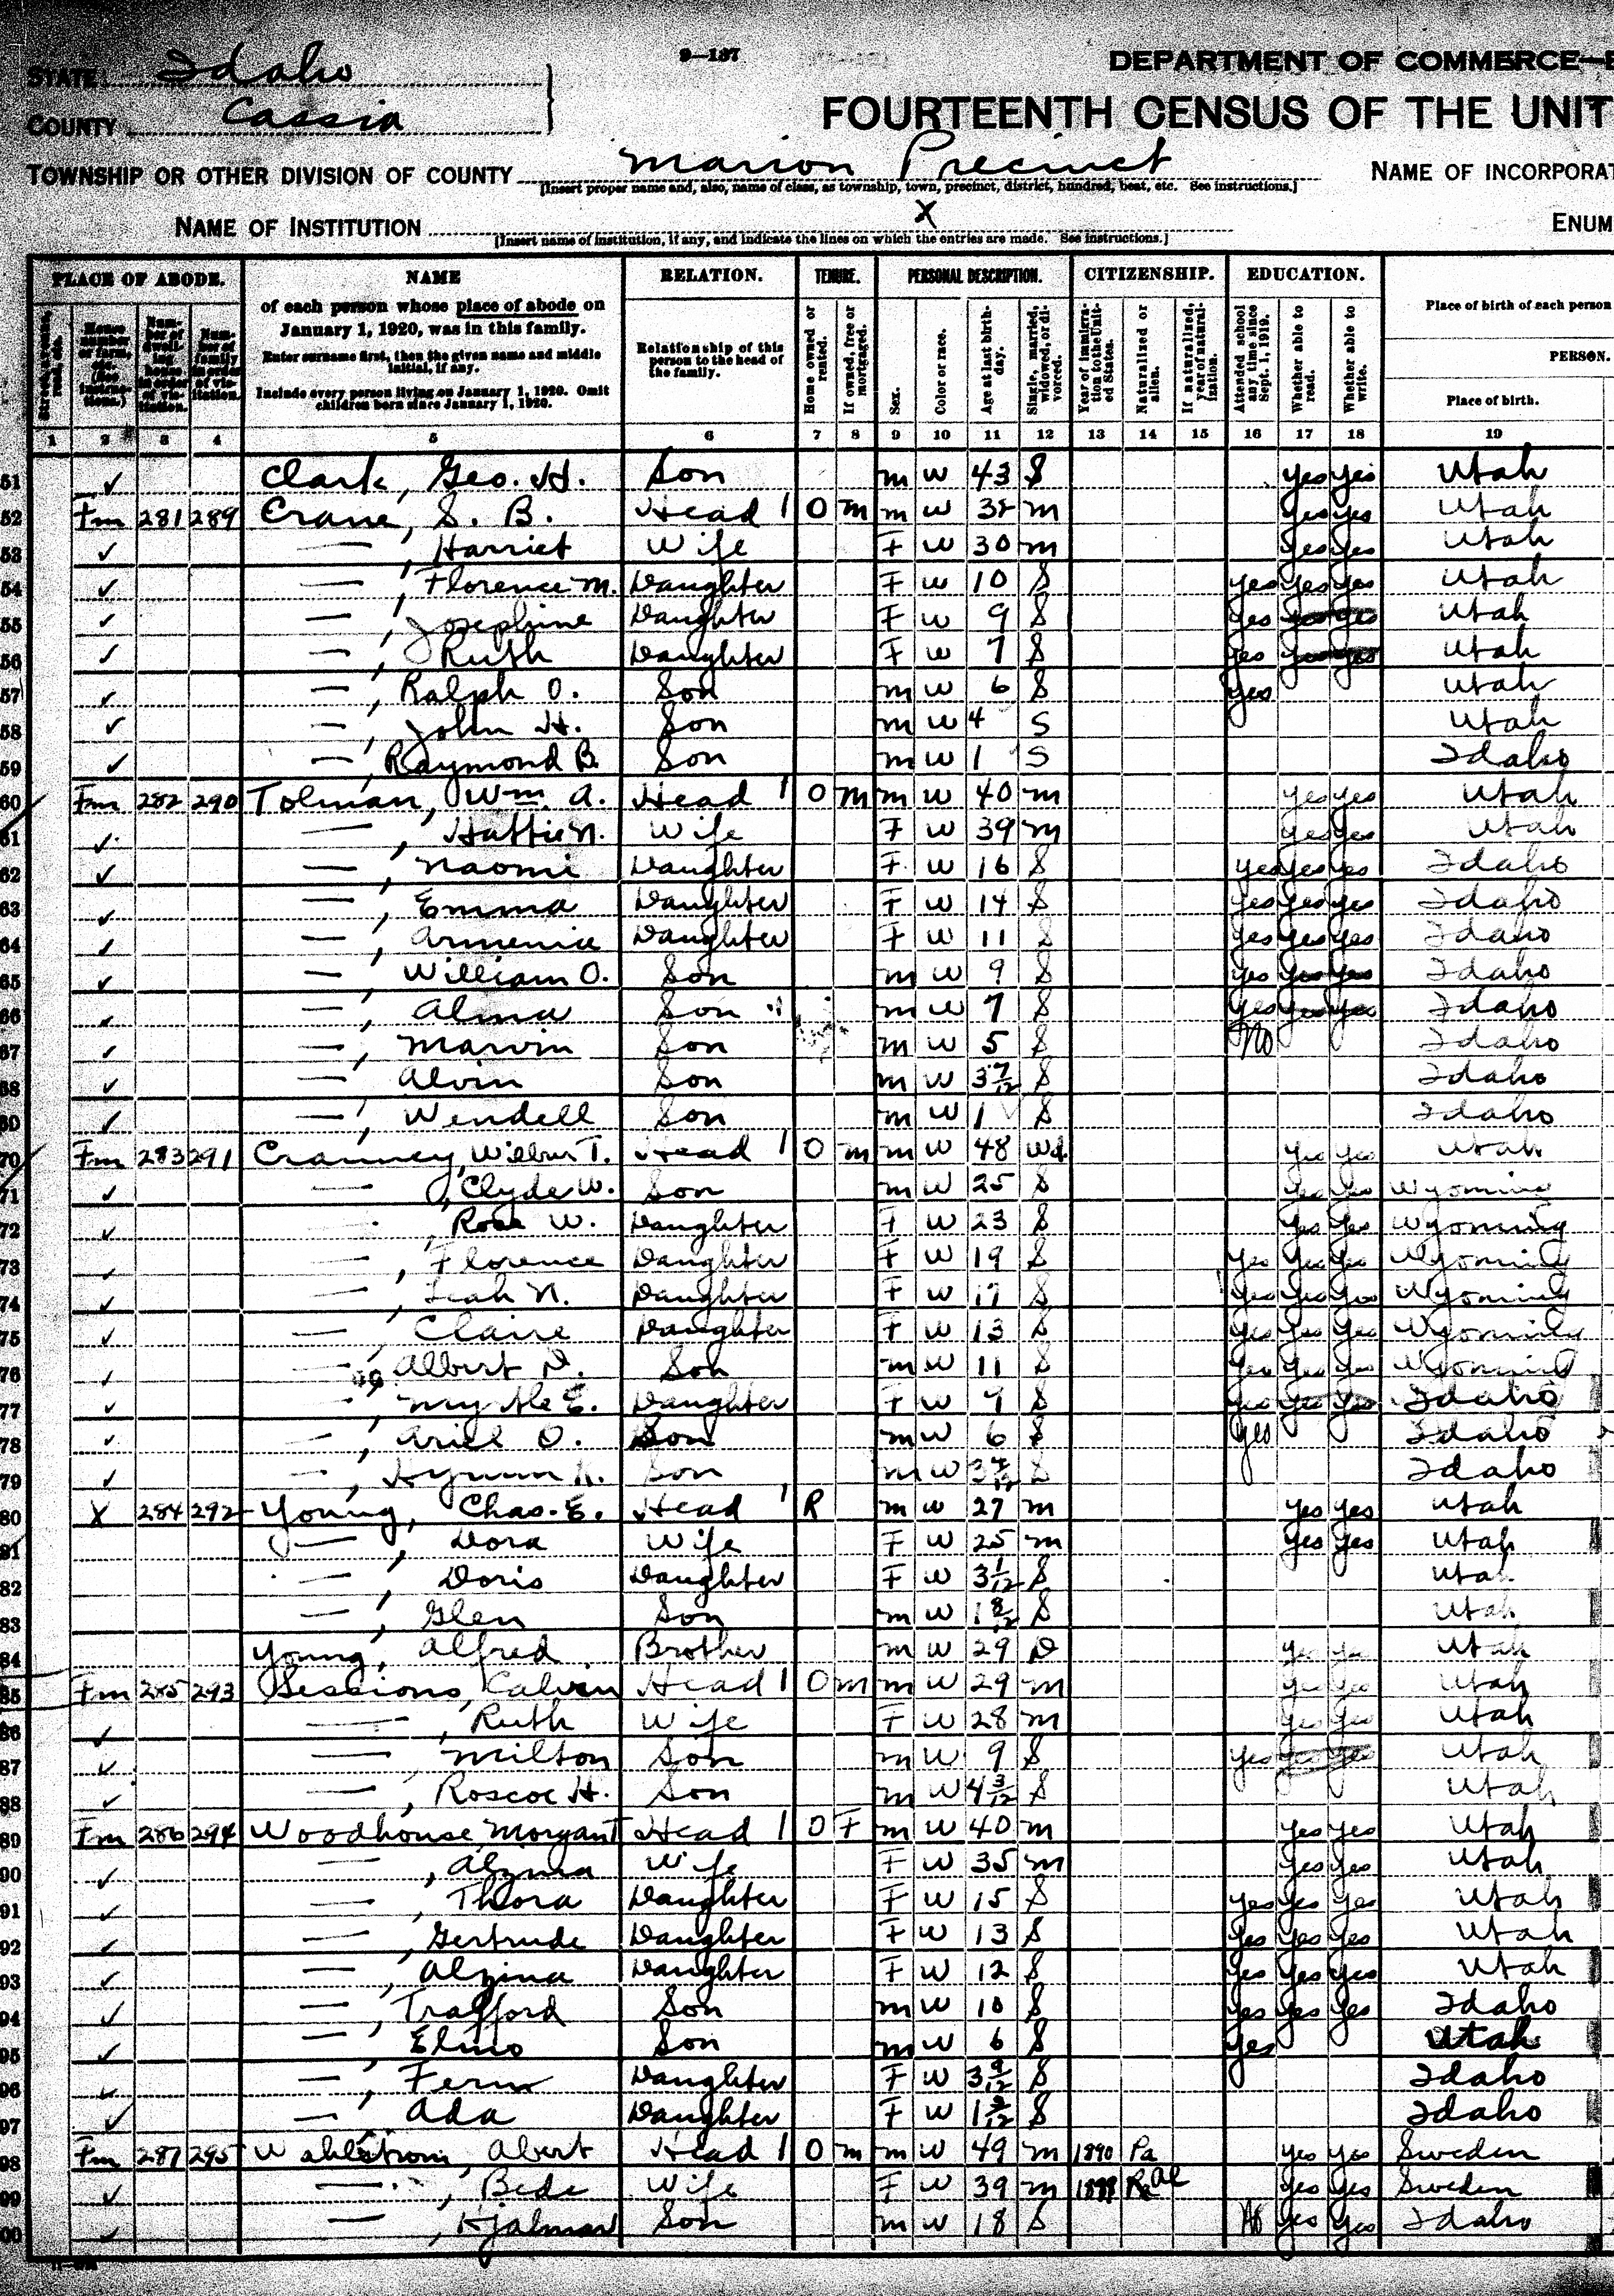 1920 Census Record-Wilber Thomas Cranney and Children